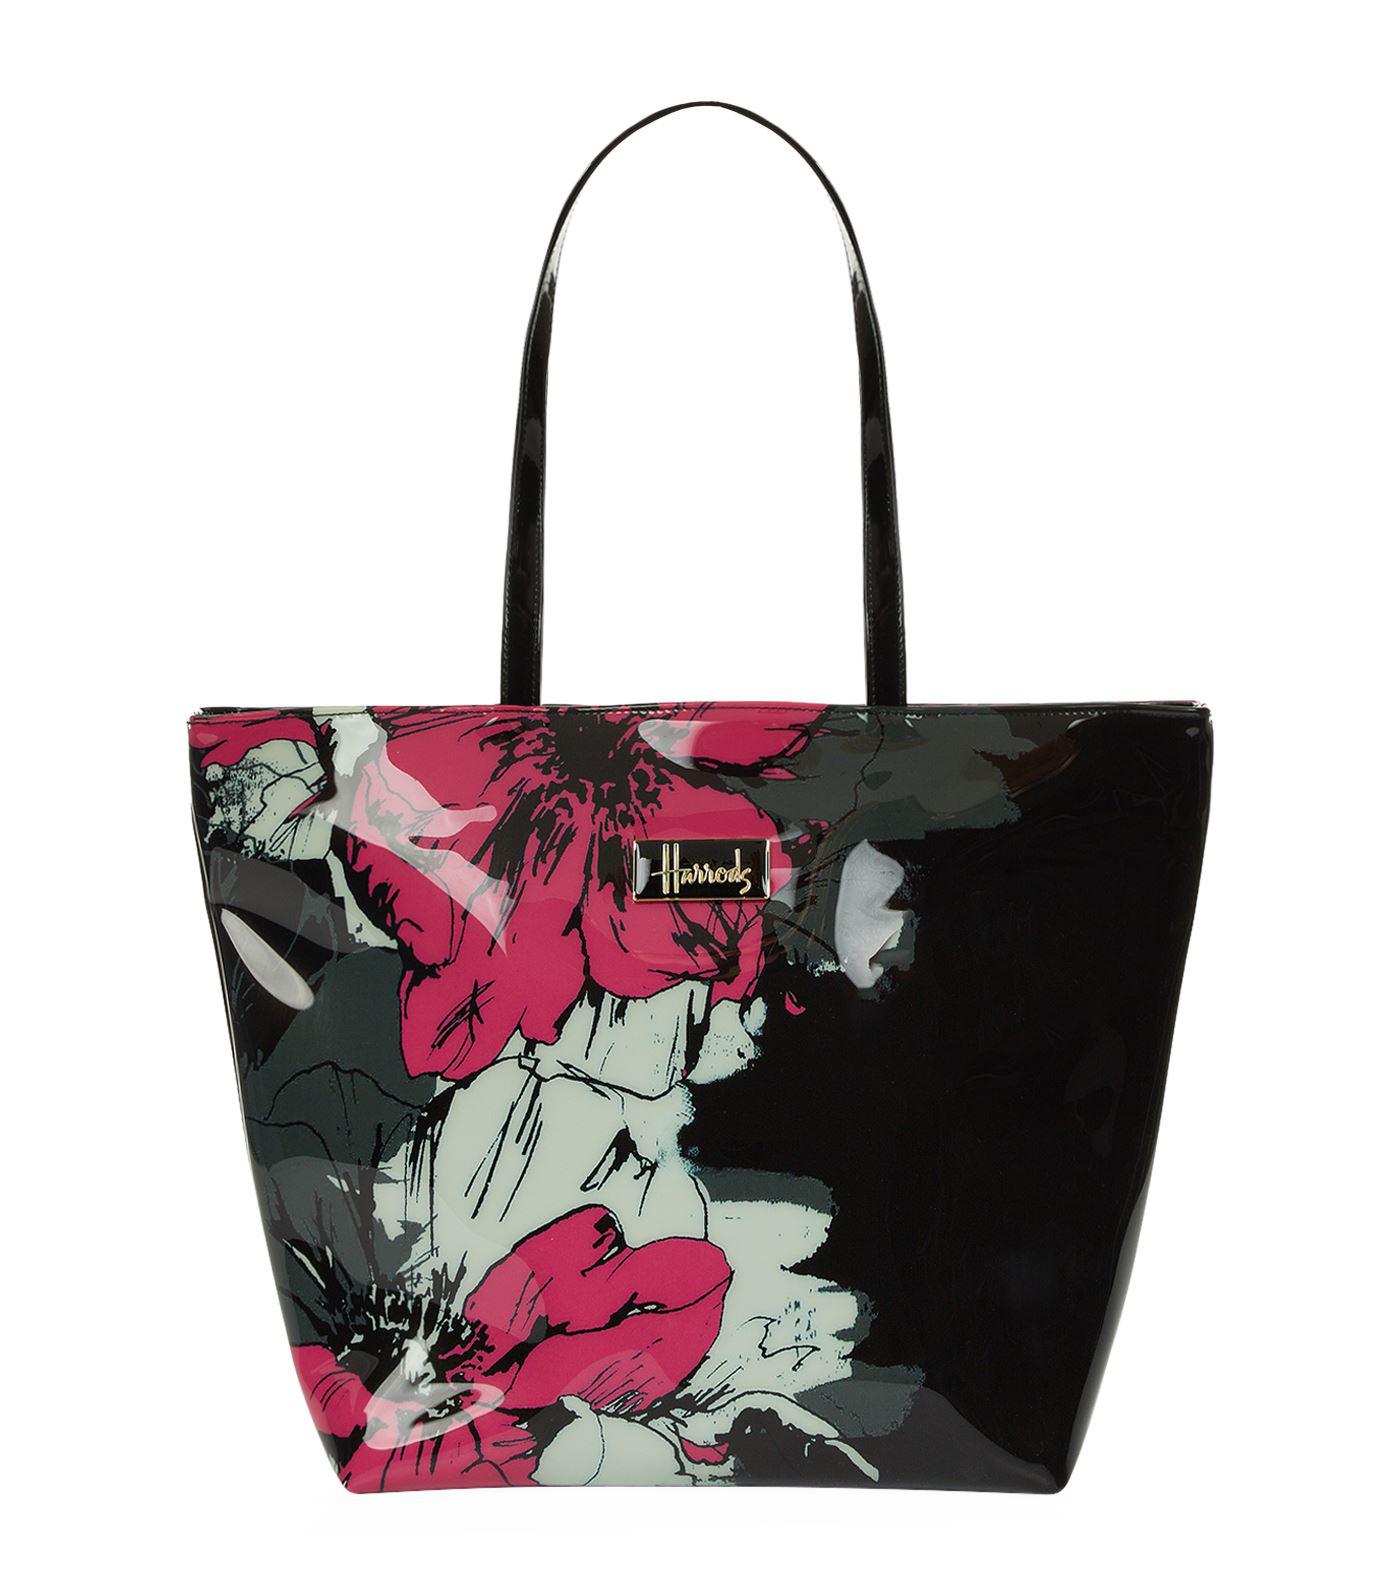 Harrods Cotton Abstract Floral Shoulder Tote Bag in Black - Lyst